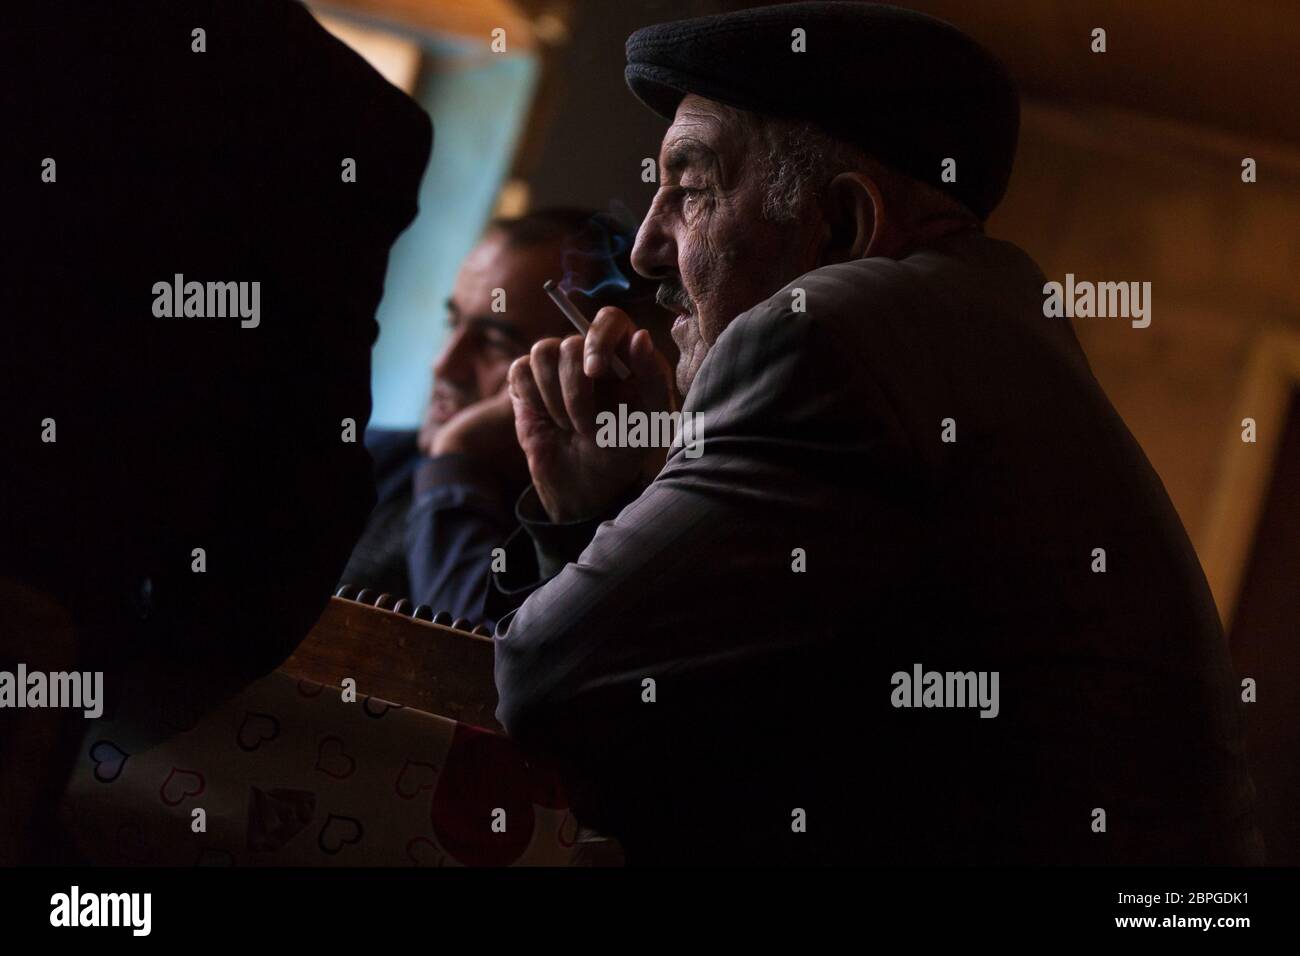 Men in the village of Lahic gather in the tea shop to meet and play dominos while drinking tea and smoking cigarettes in Lahic Azerbaijan. Stock Photo